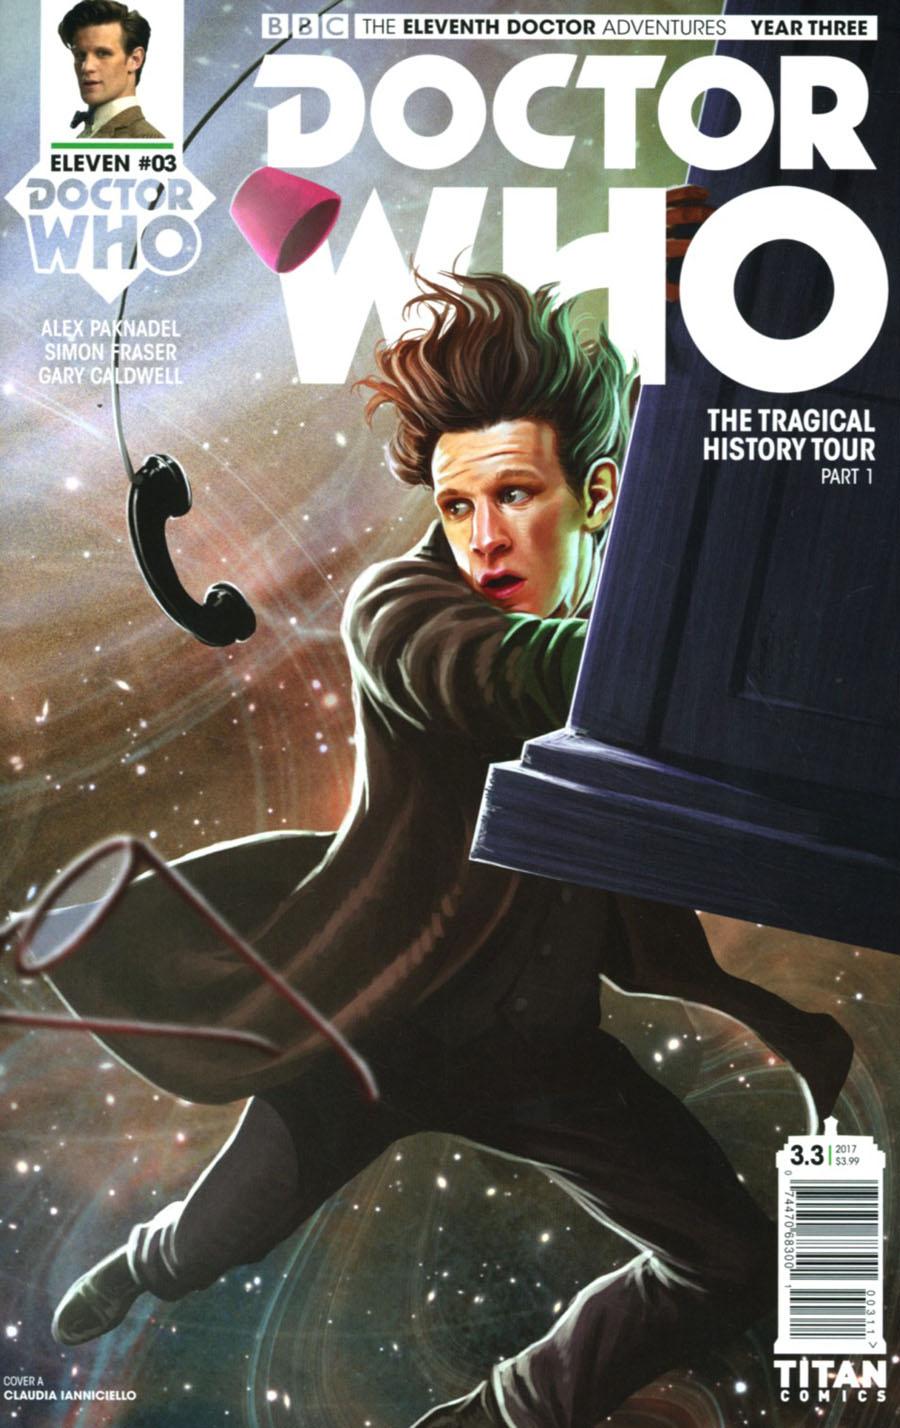 Doctor Who 11th Doctor Year Three Vol. 1 #3